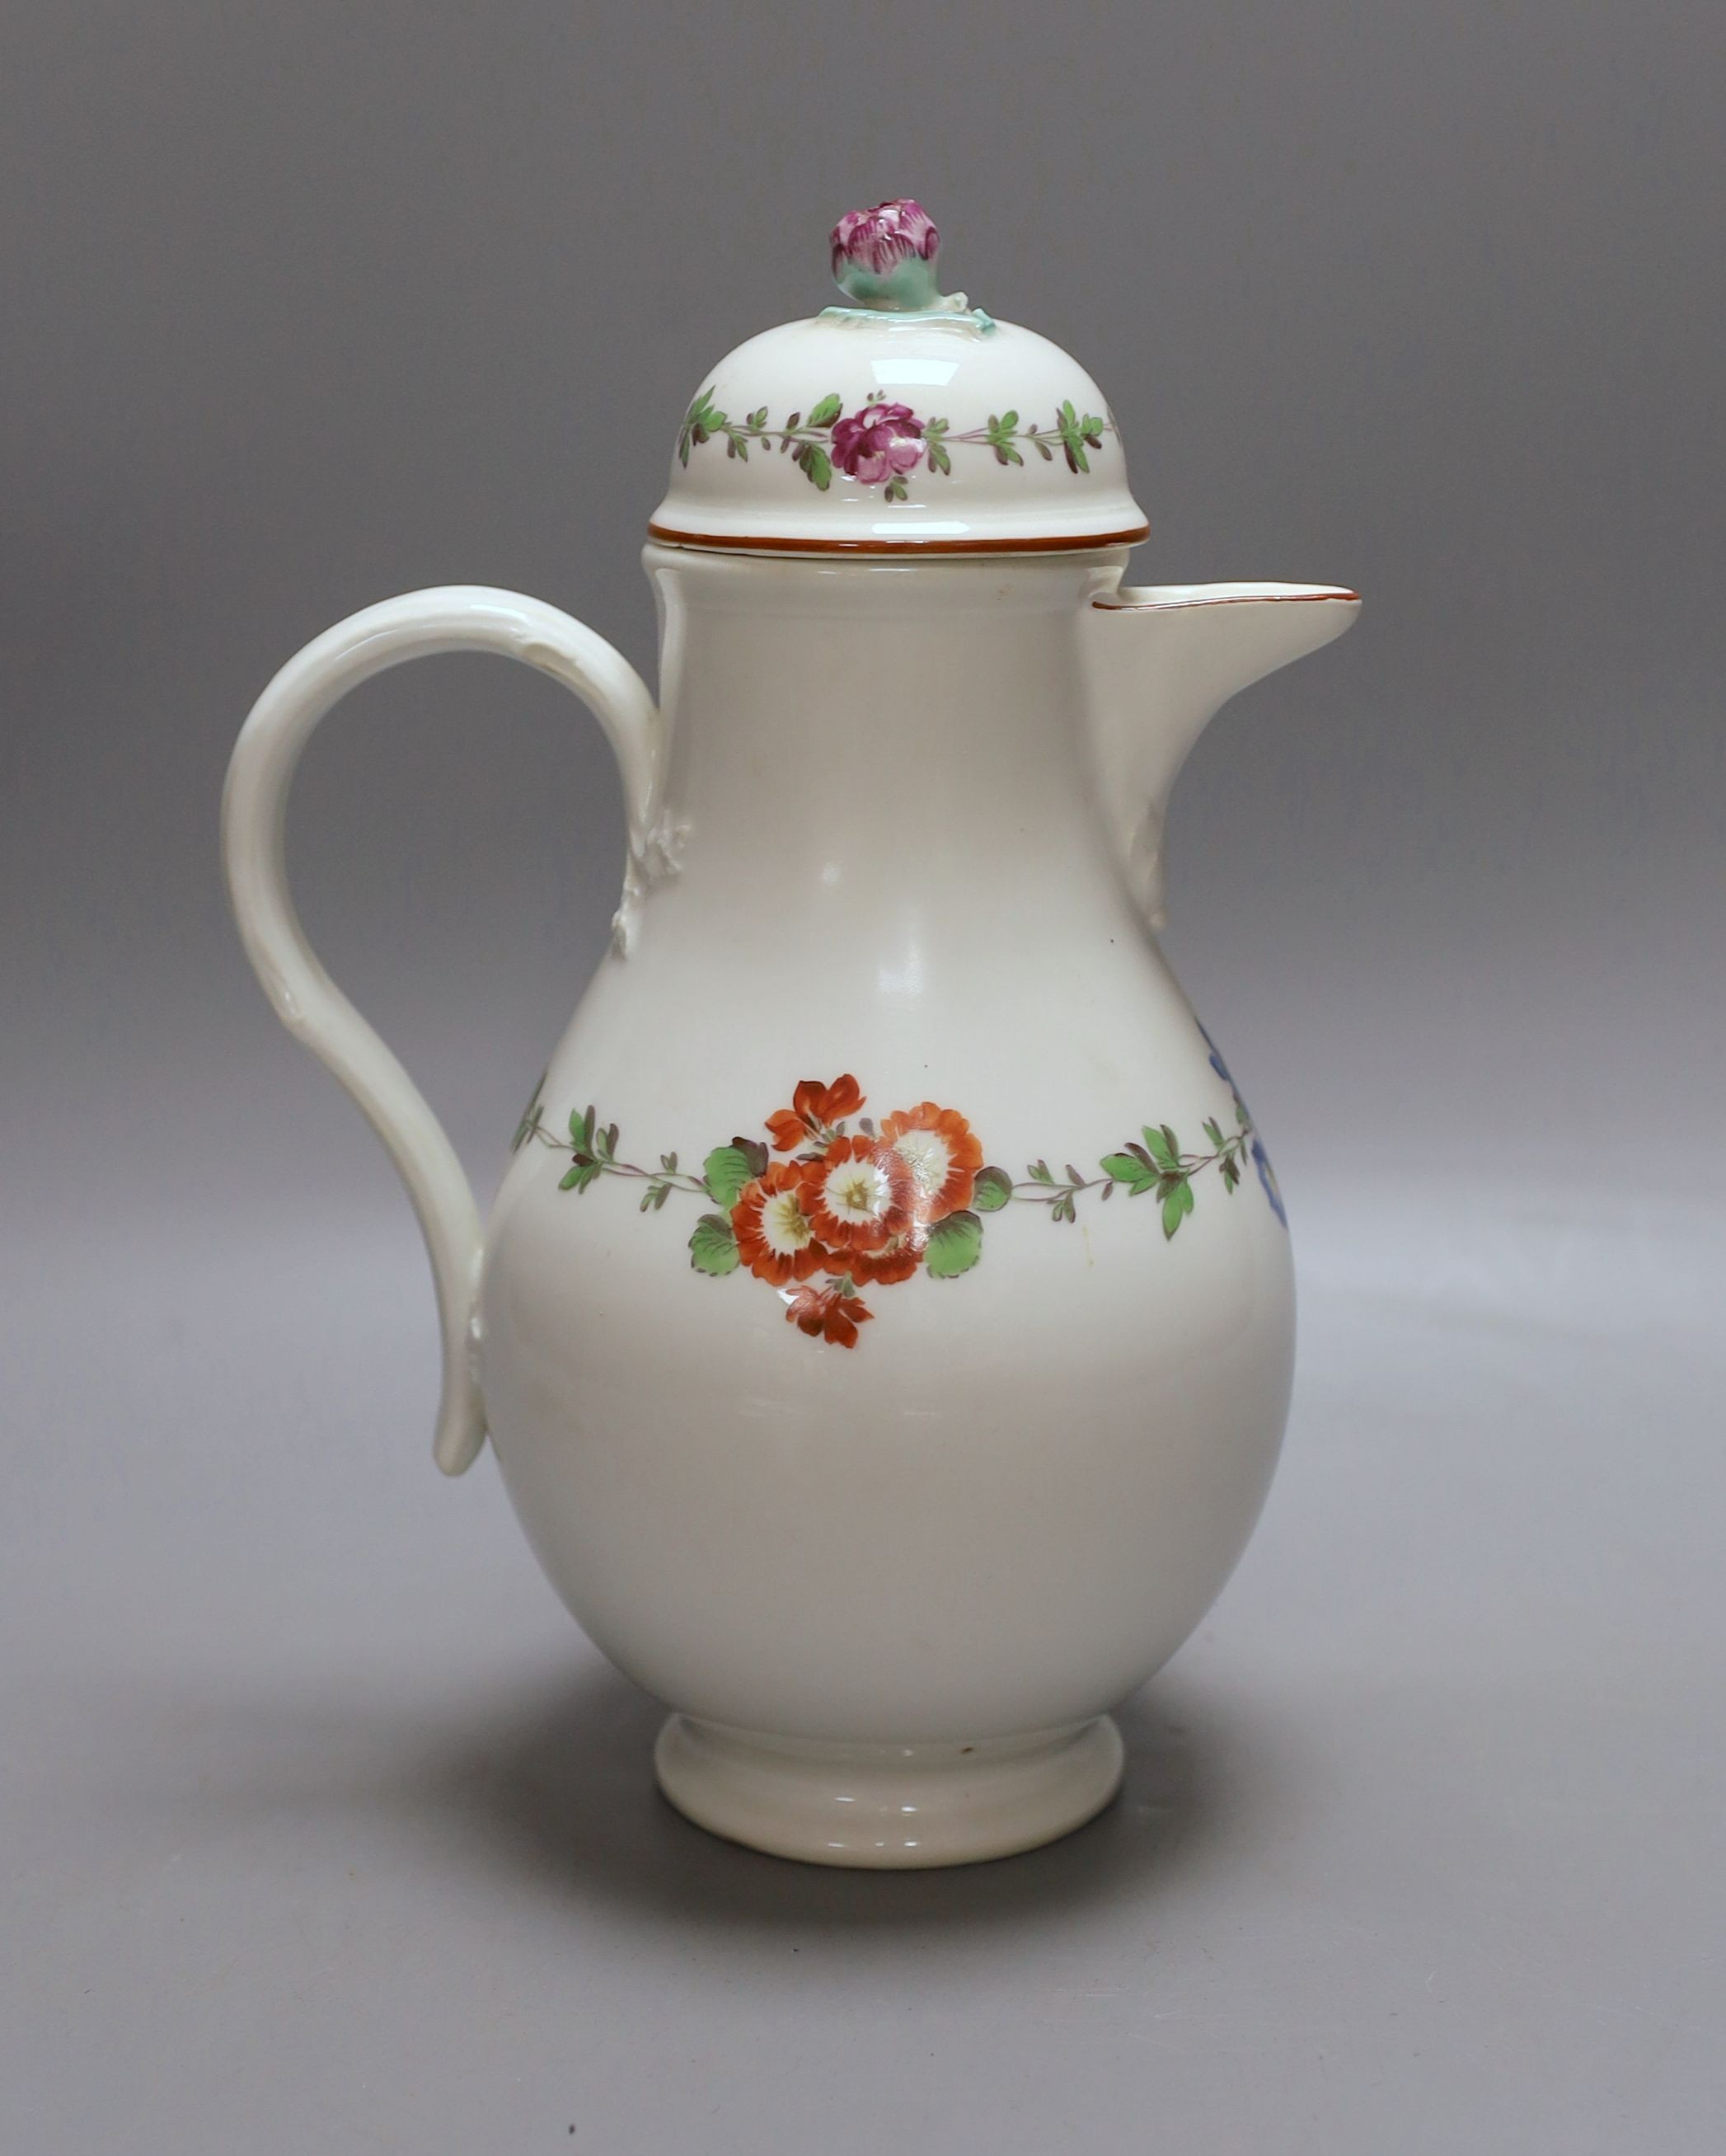 A Meissen jug and cover, Marcolini period, c. 1800 - 24cm tall